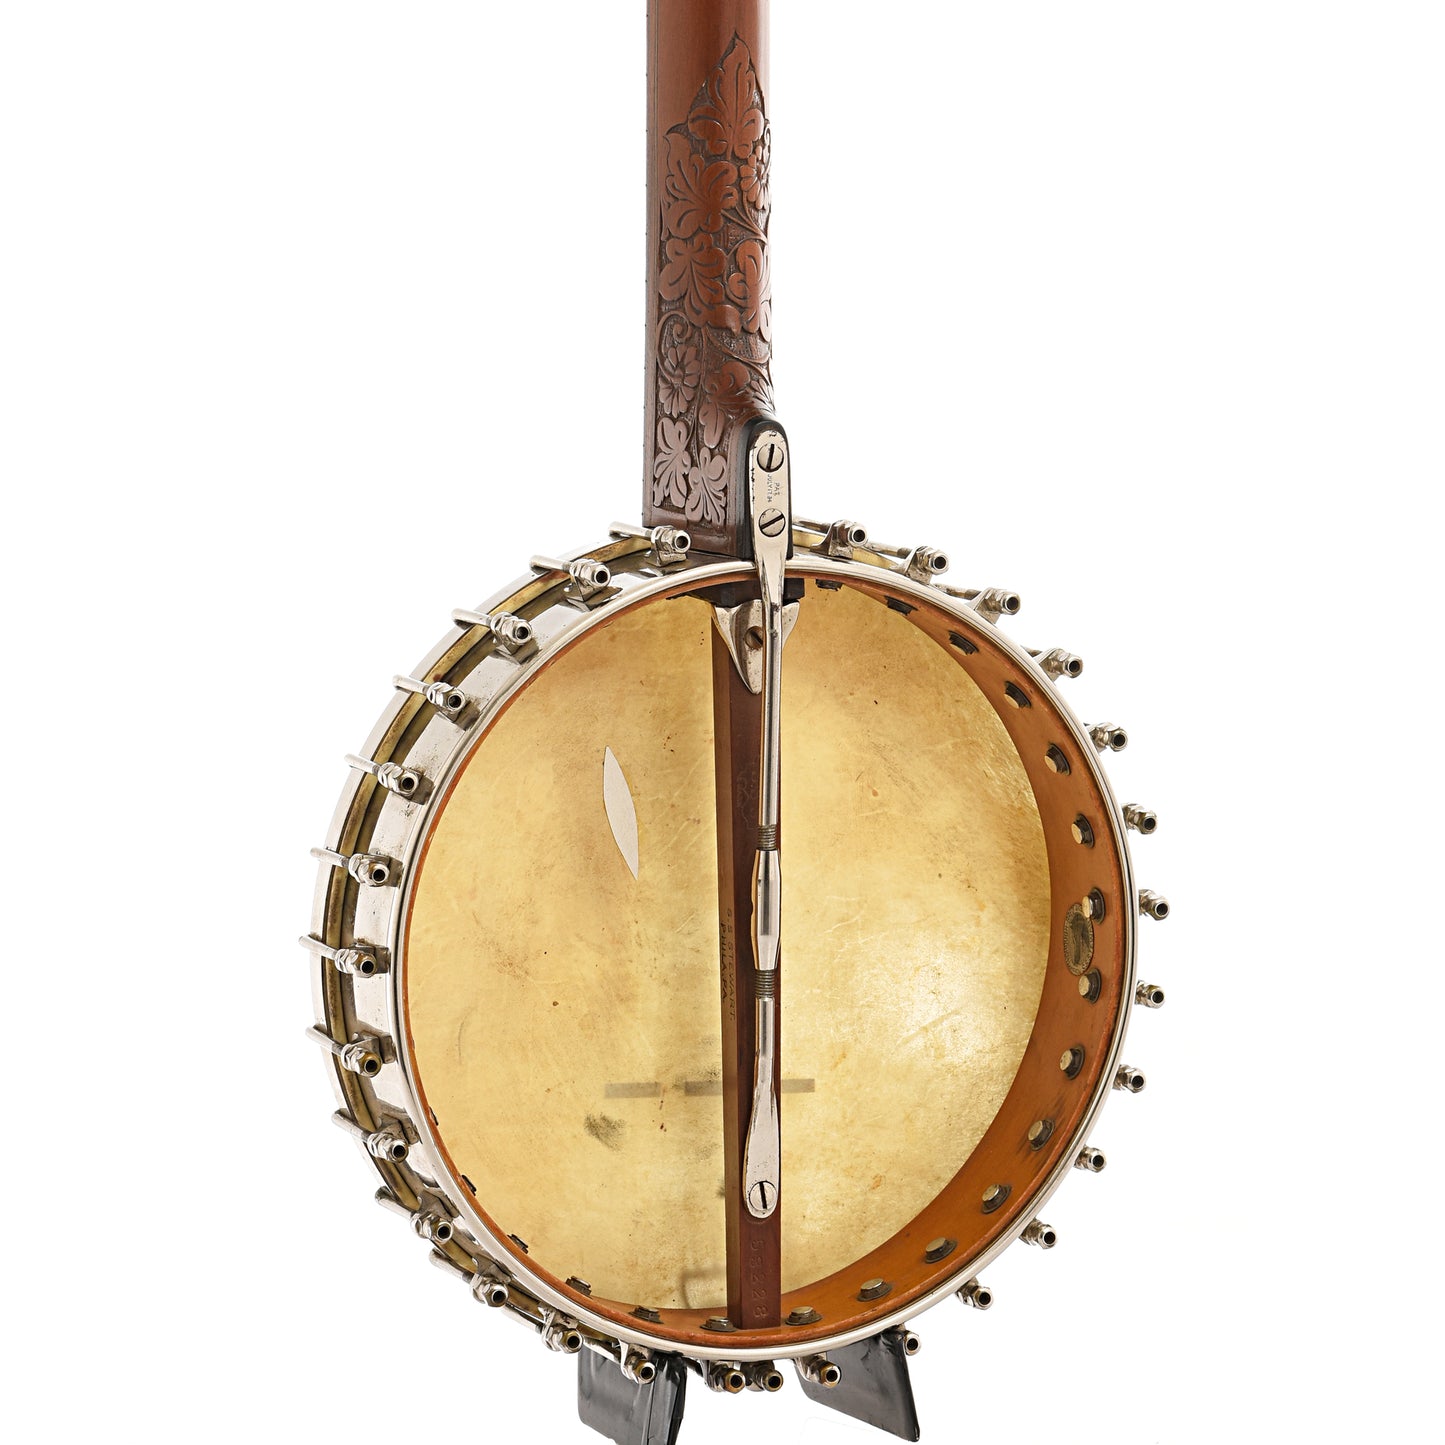 Back and side of S.S. Stewart Special Thoroughbred Open Back Banjo (c.1890)